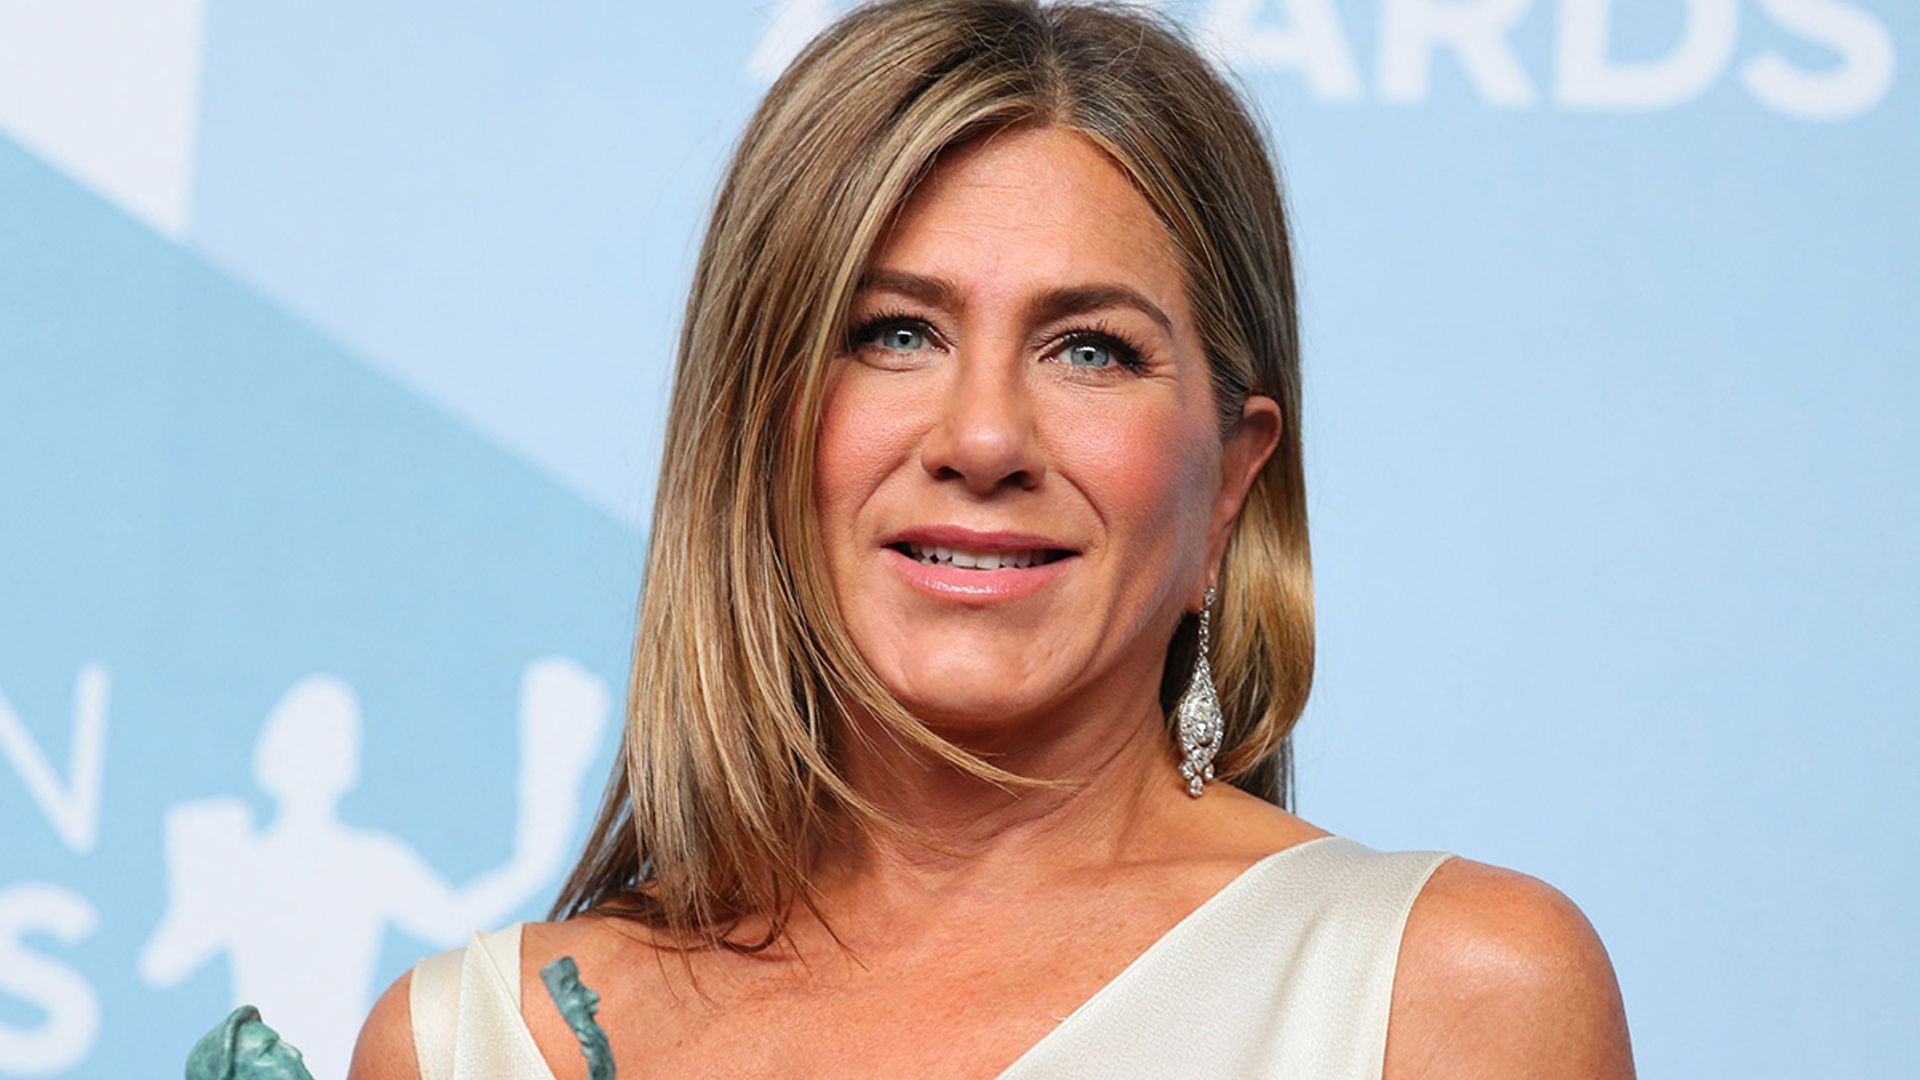 Jennifer Aniston shares wonderful behind-the-scenes look at Friends reunion